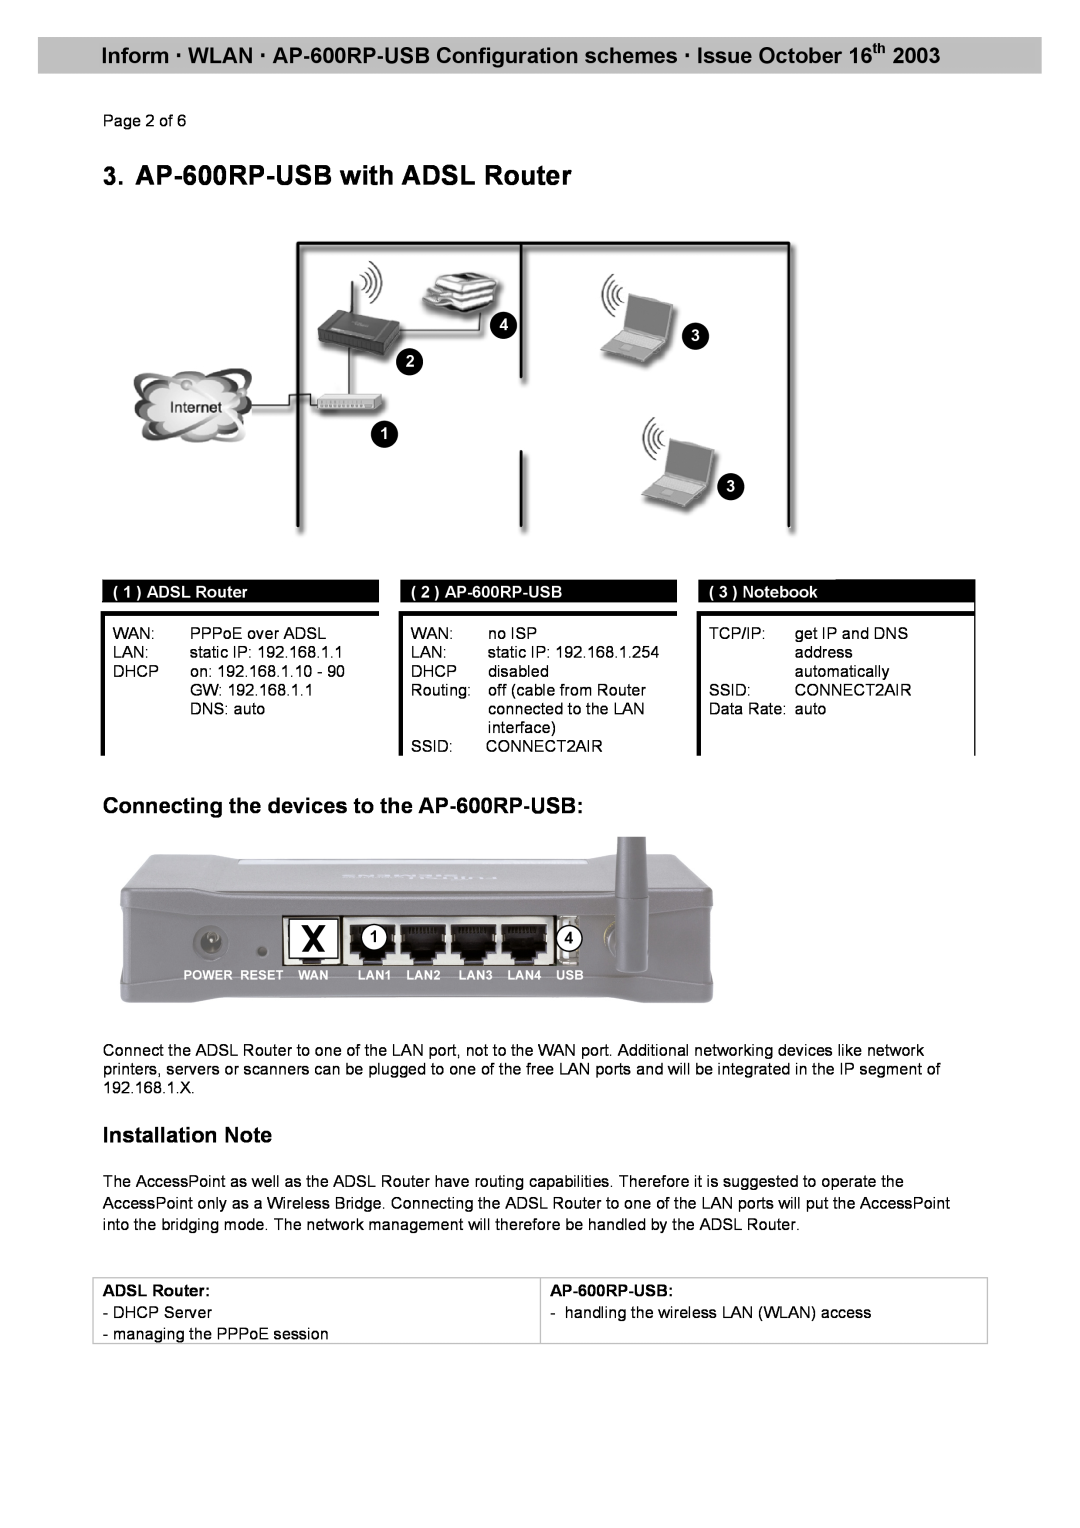 Fujitsu manual AP-600RP-USB with ADSL Router, Connecting the devices to the AP-600RP-USB, Installation Note, Notebook 